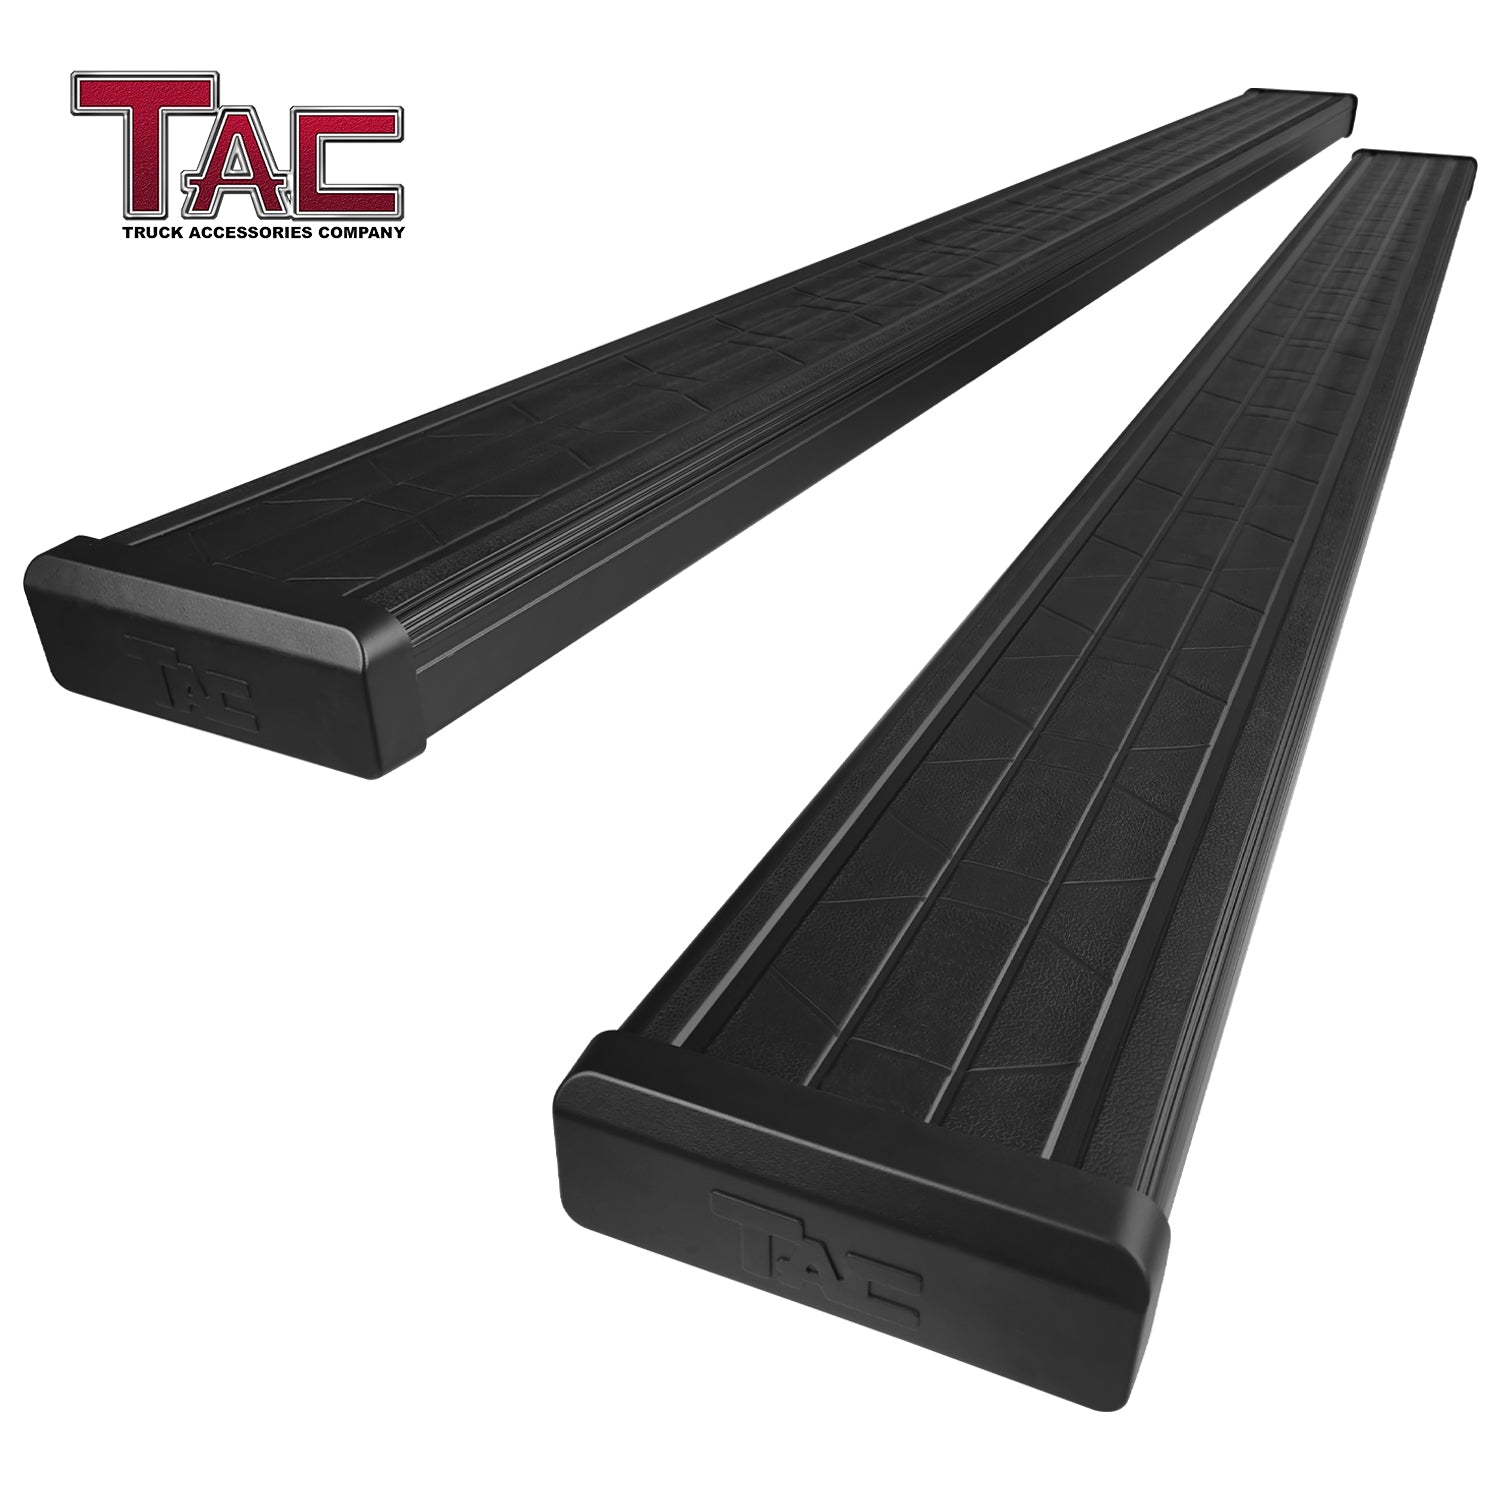 TAC Spear Running Boards Compatible with 2019-2025 Dodge Ram 1500 Quad Cab (Exclude 2019-2024 Ram 1500 Classic) 6" Side Step Rail Nerf Bar Truck Accessories Aluminum Texture Black Width Body 2Pcs